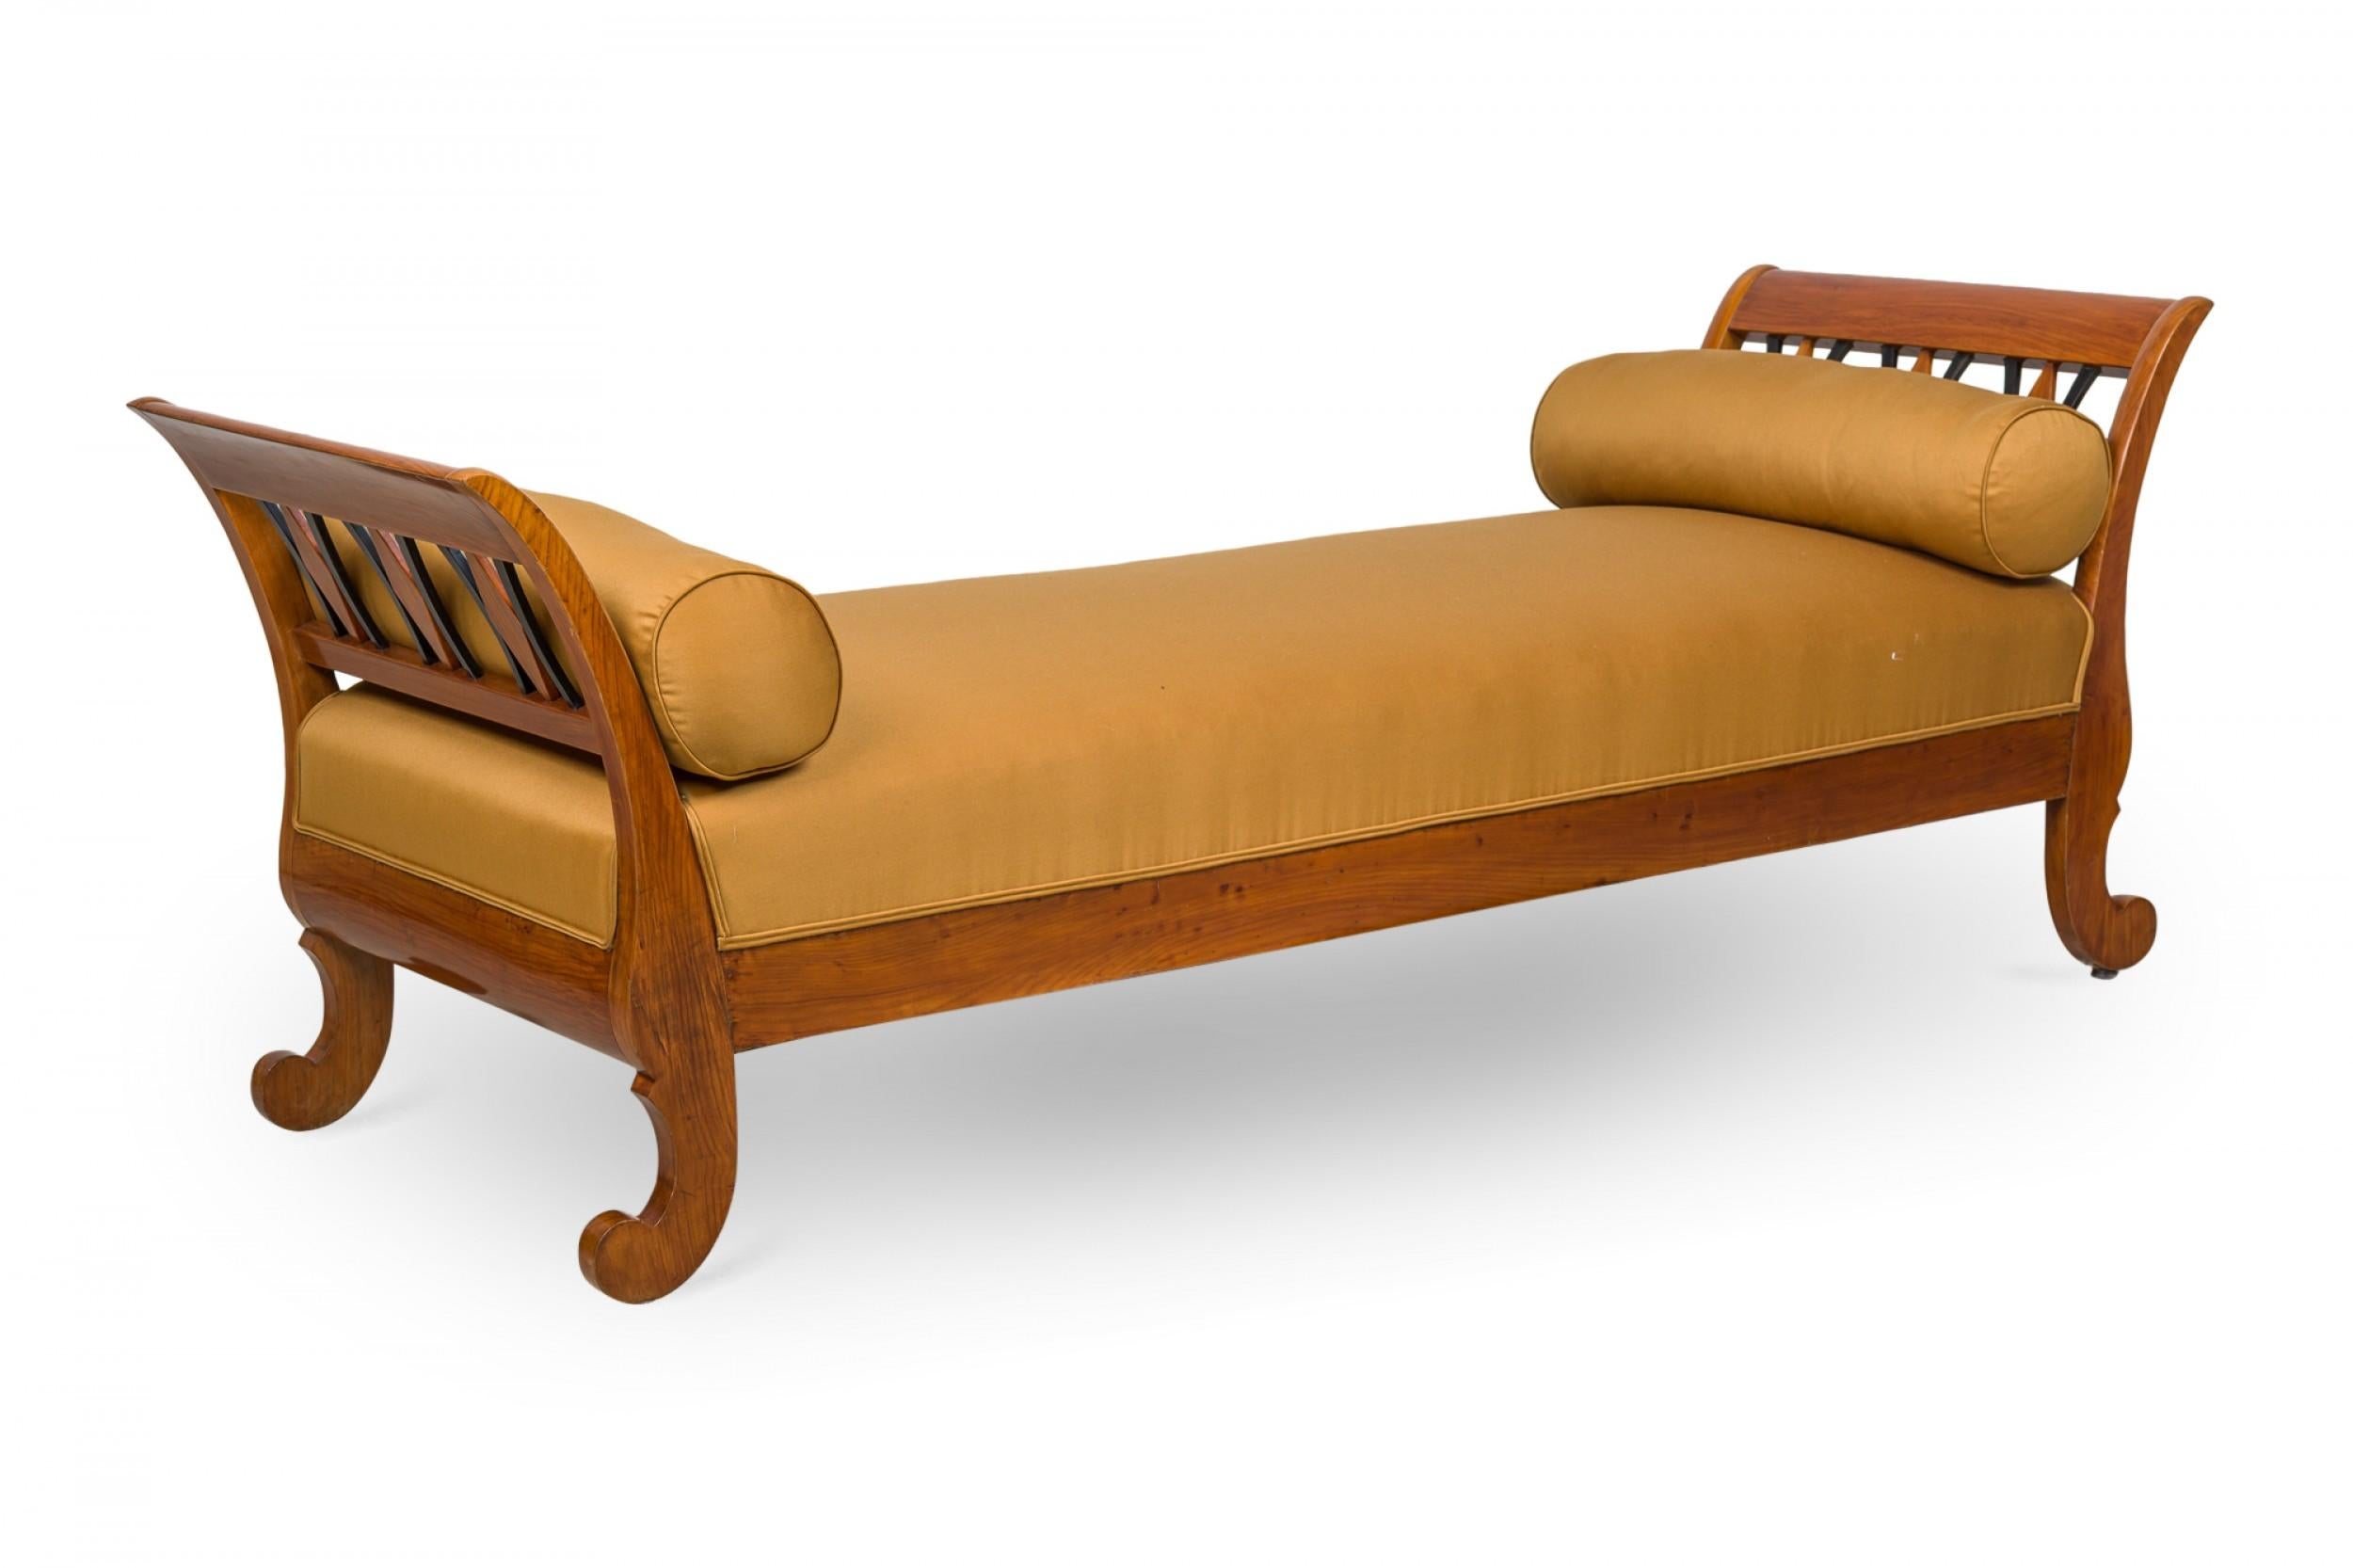 Austrian Biedermeier (circa 1830) cherrywood daybed with open design black trimmed sides on scroll legs with white upholstered seat and 2 bolsters
